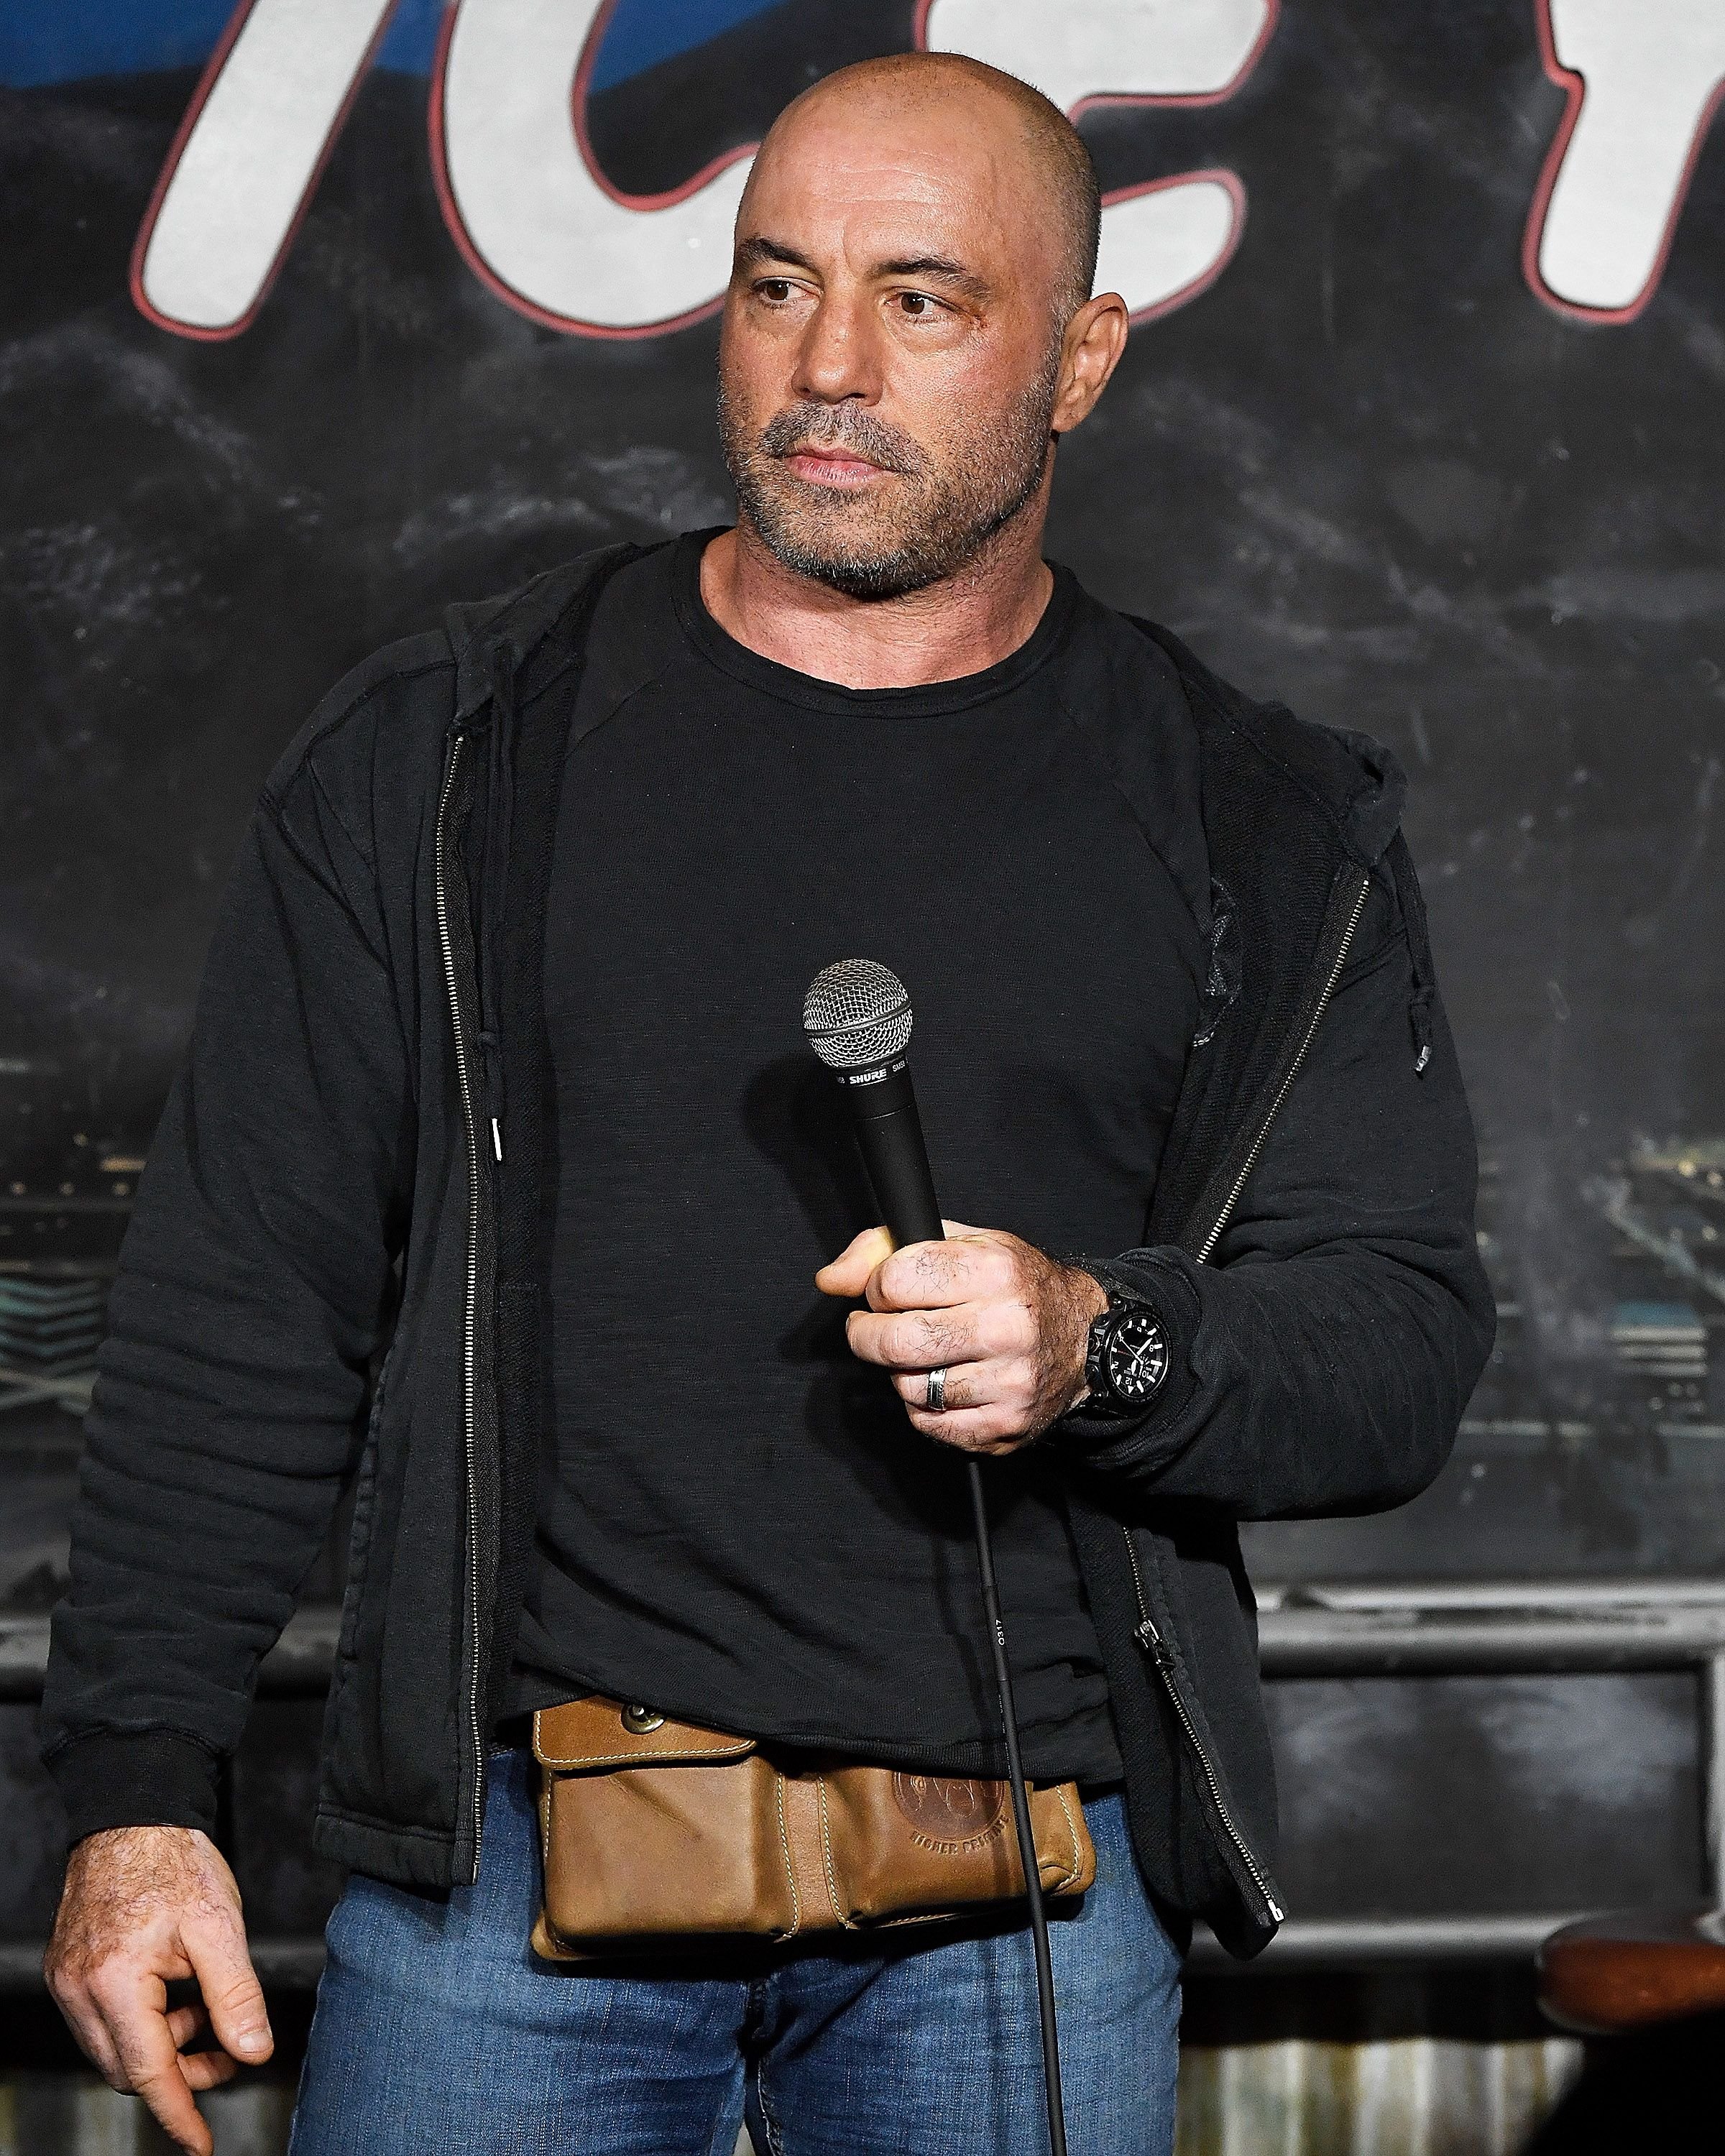 Joe Rogan performing at The Ice House Comedy Club in Pasadena, California | Photo: Michael S. Schwartz/Getty Images